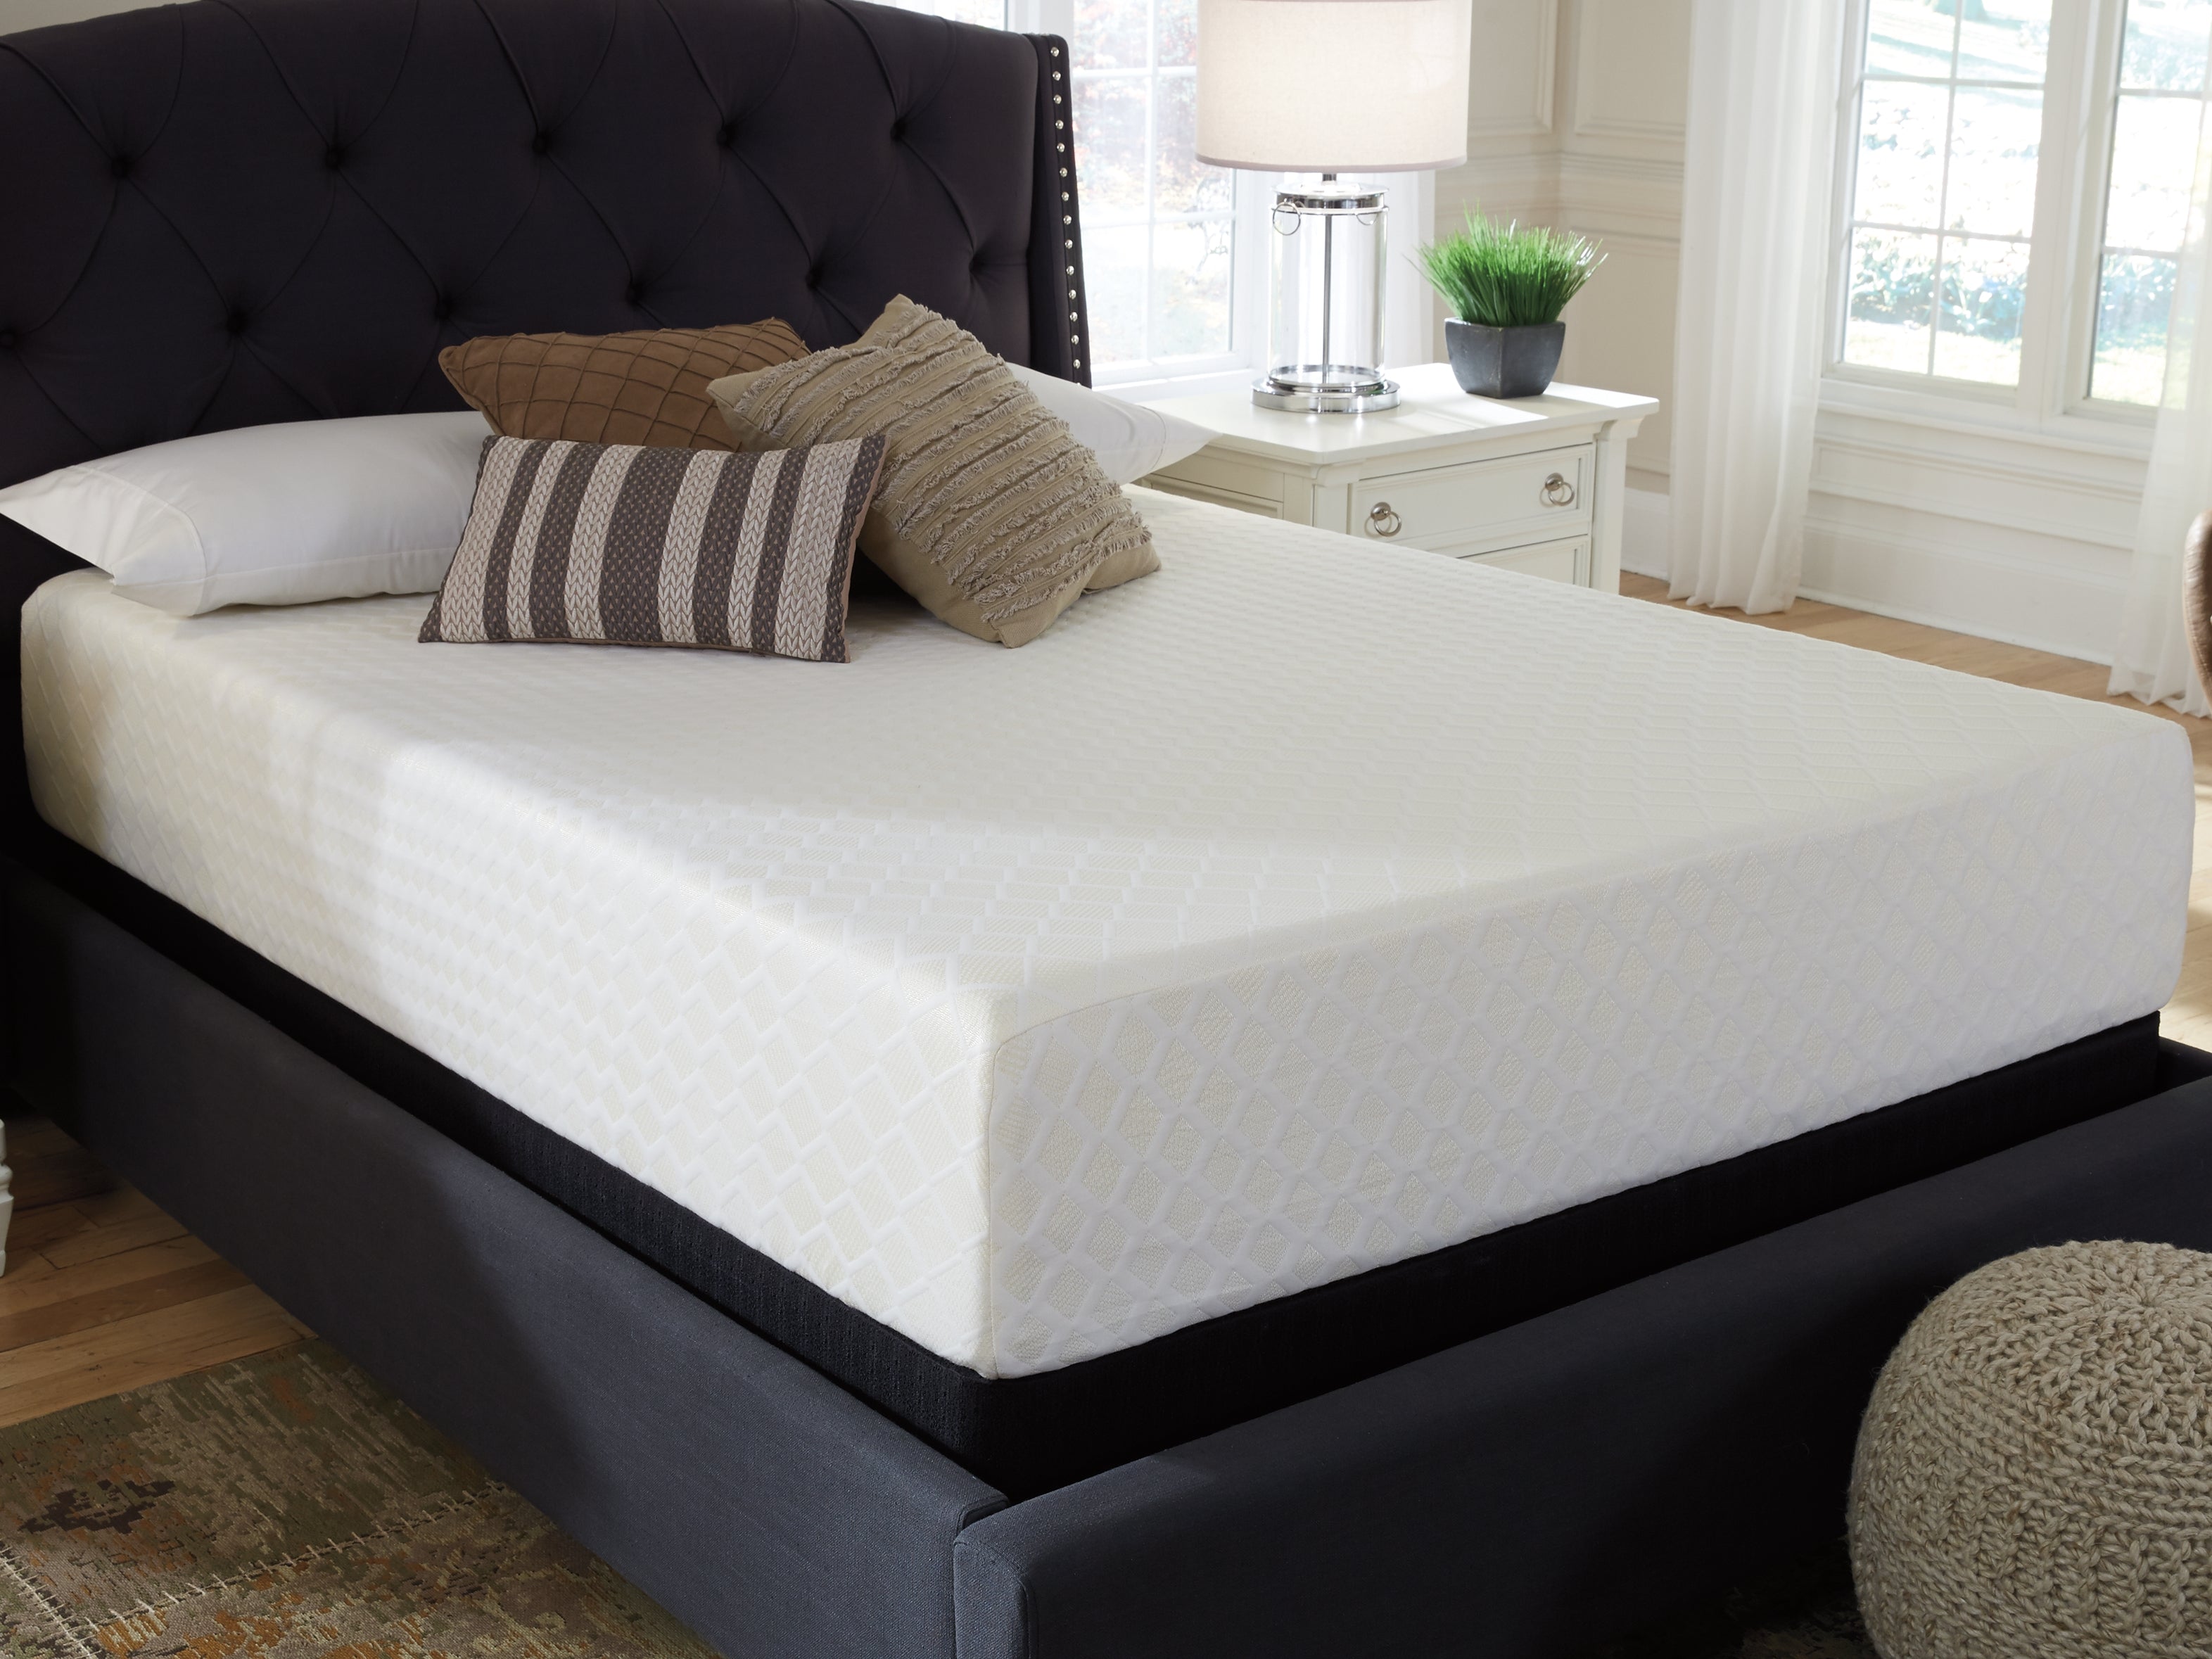 Chime 12 Inch Memory Foam King Mattress in a Box with Head-Foot Model Better King Adjustable Base - furniture place usa